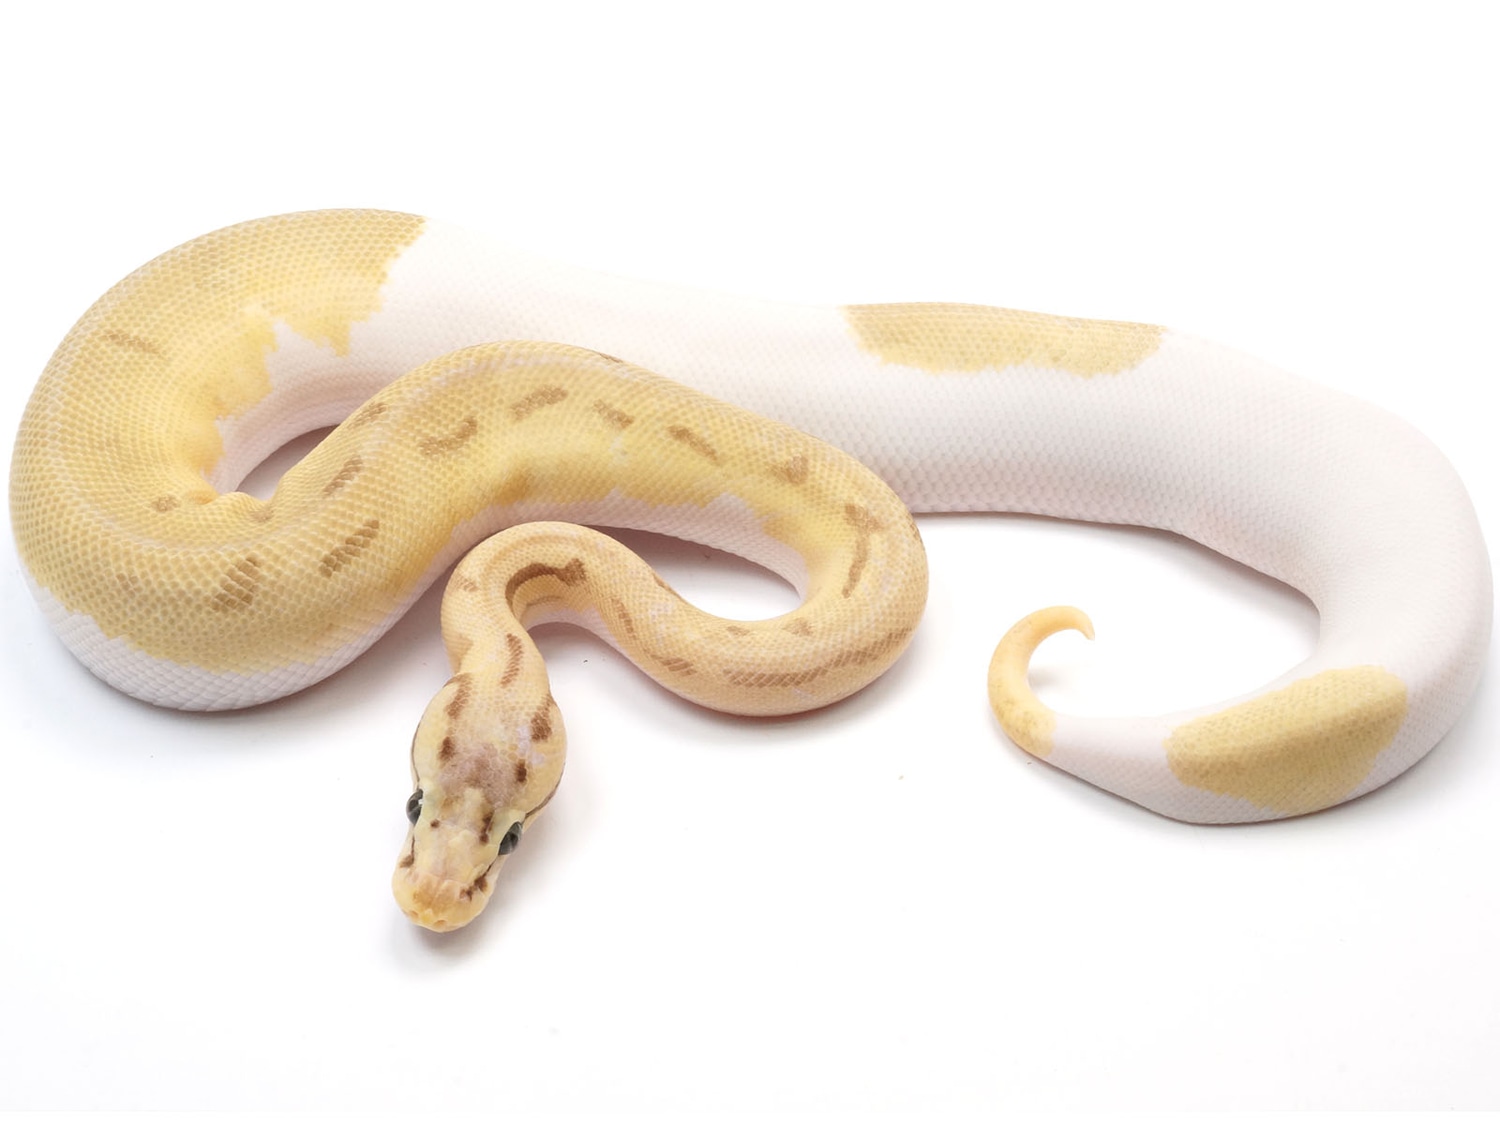 Pied Odium Leopard ++ Ball Python by New England Reptile Distributors